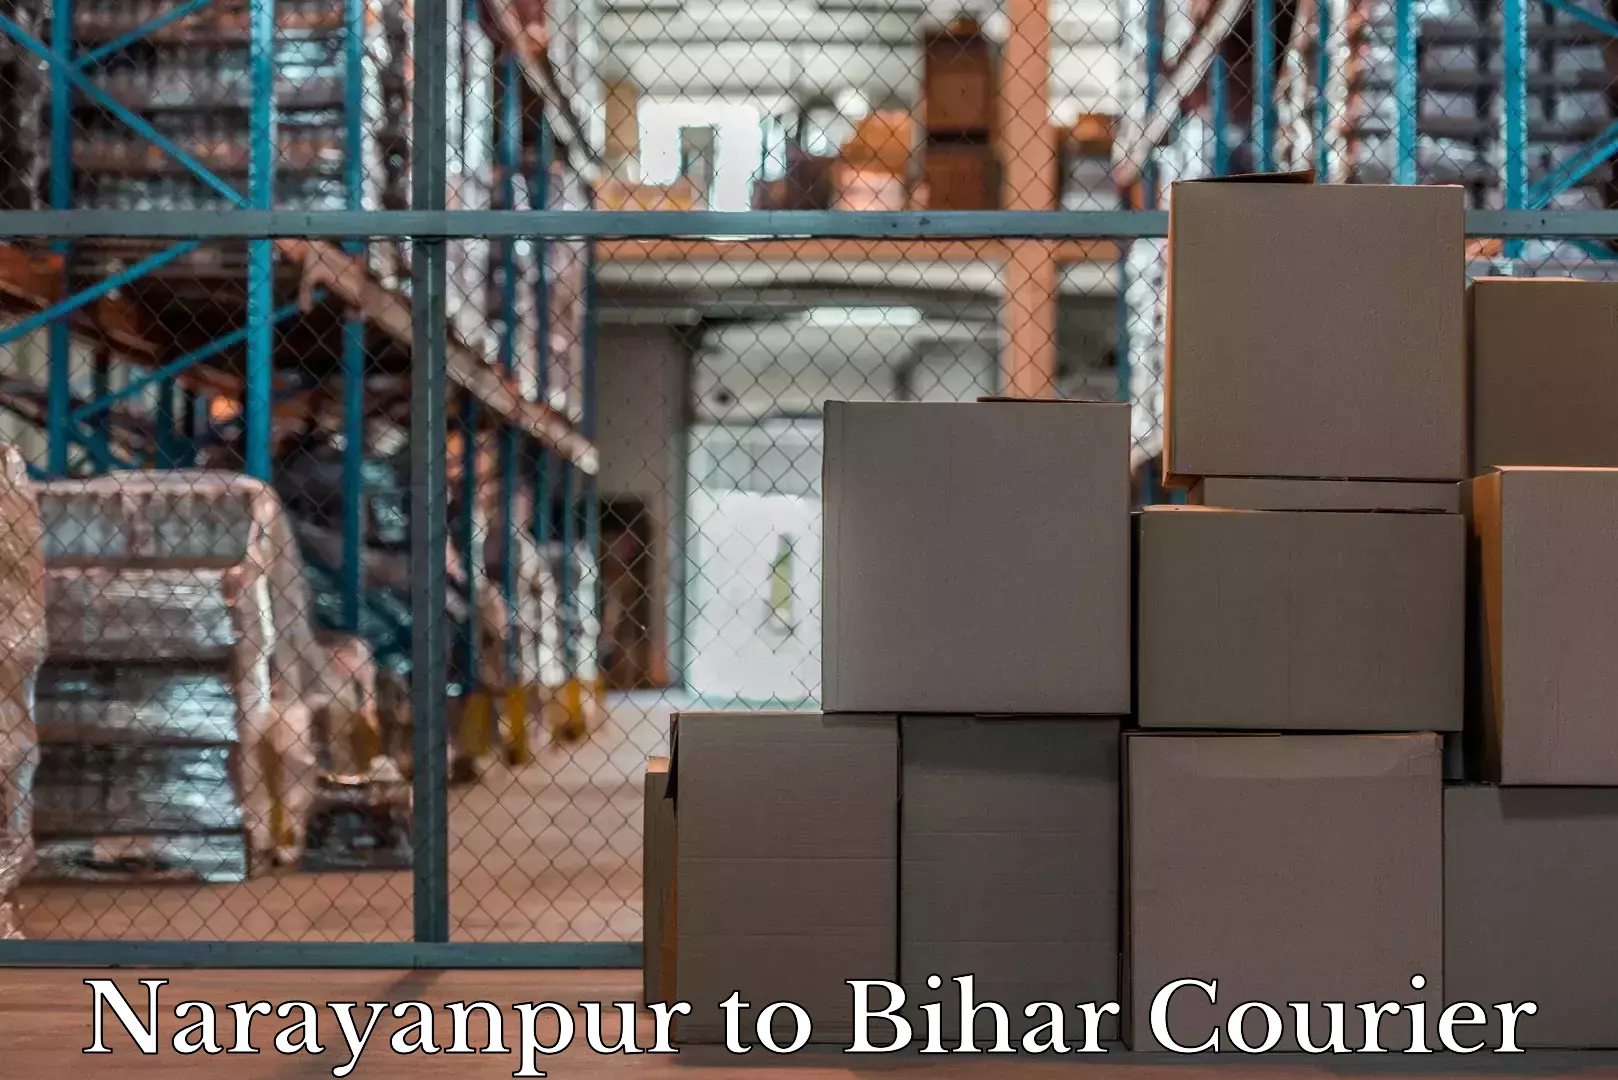 Baggage transport management in Narayanpur to Bihar